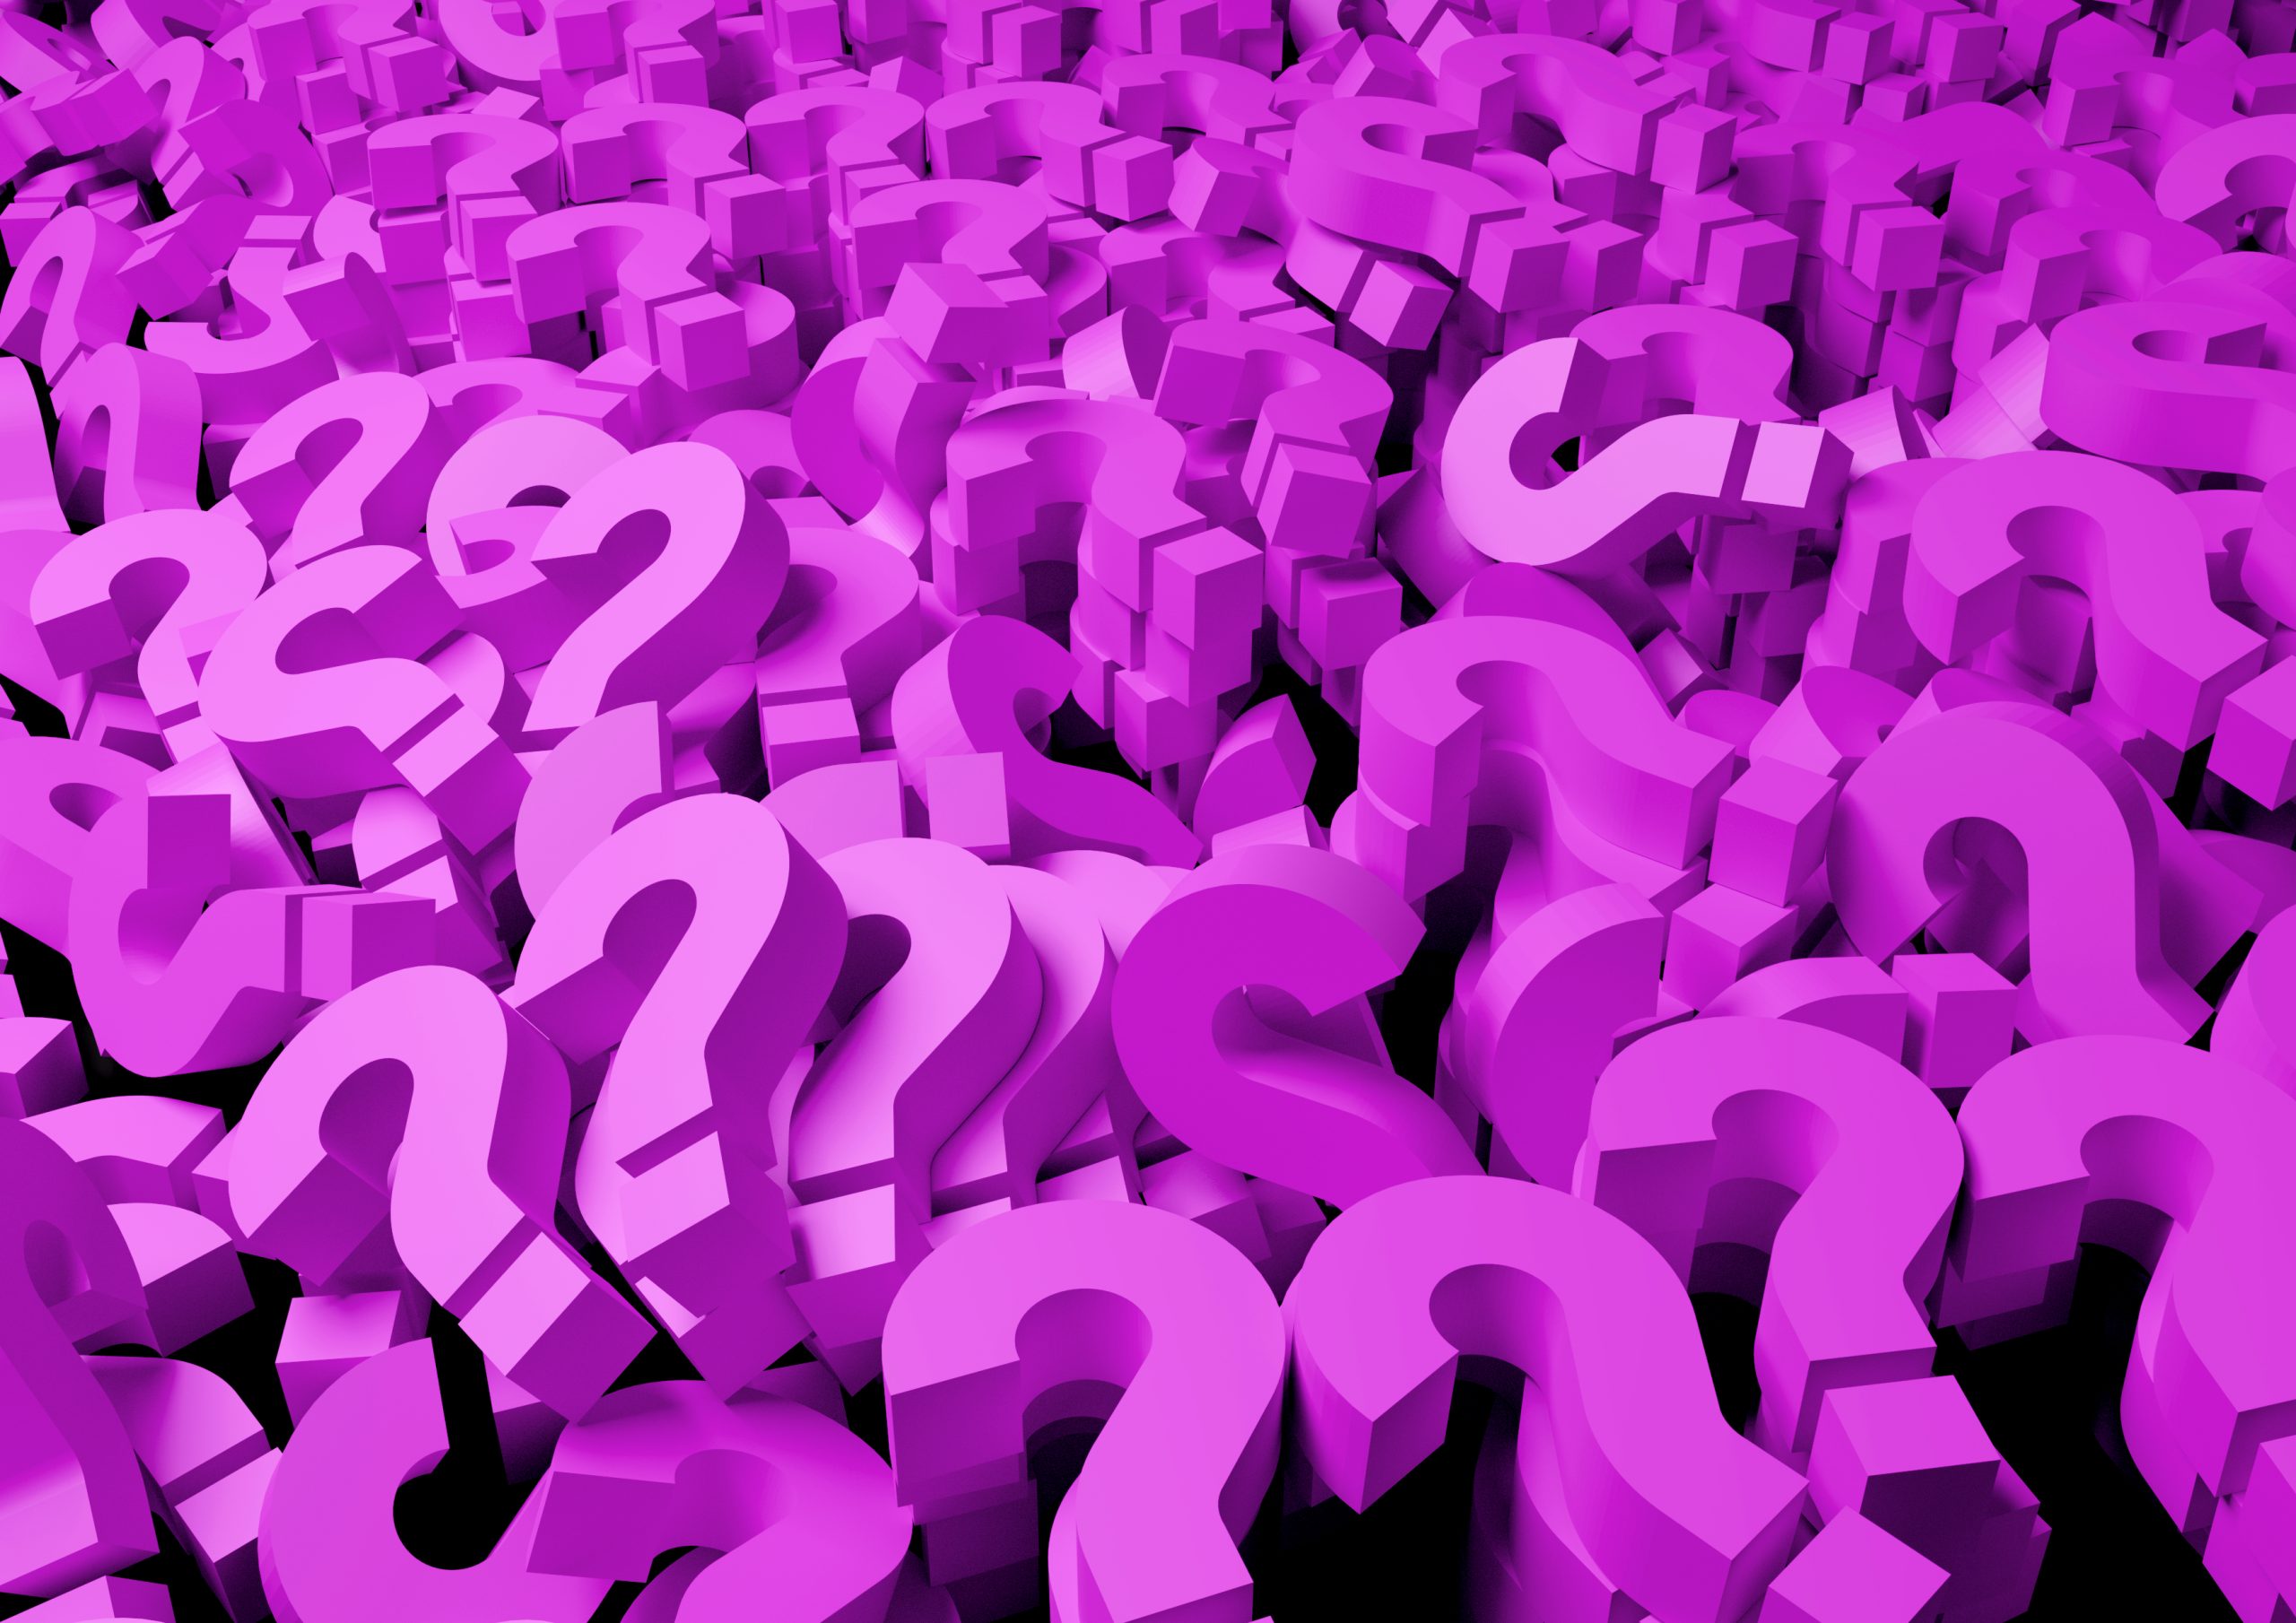 background purple question marks, filling the whole frame modeled in 3D